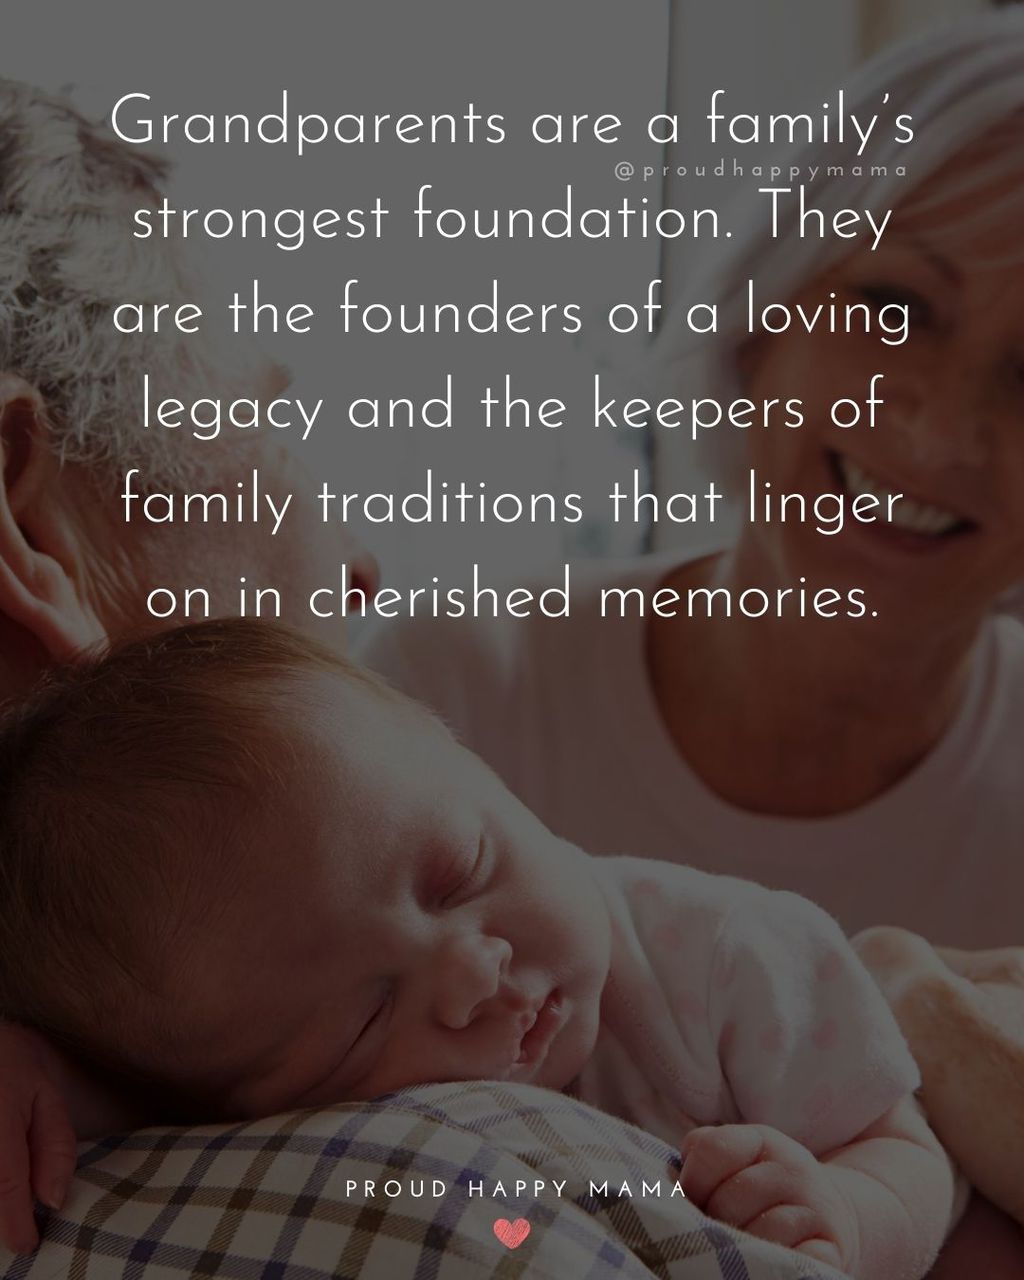 Grandparents Day Quotes | Grandparents are a family’s strongest foundation. They are the founders of a loving legacy and the keepers of family traditions that linger on in cherished memories.